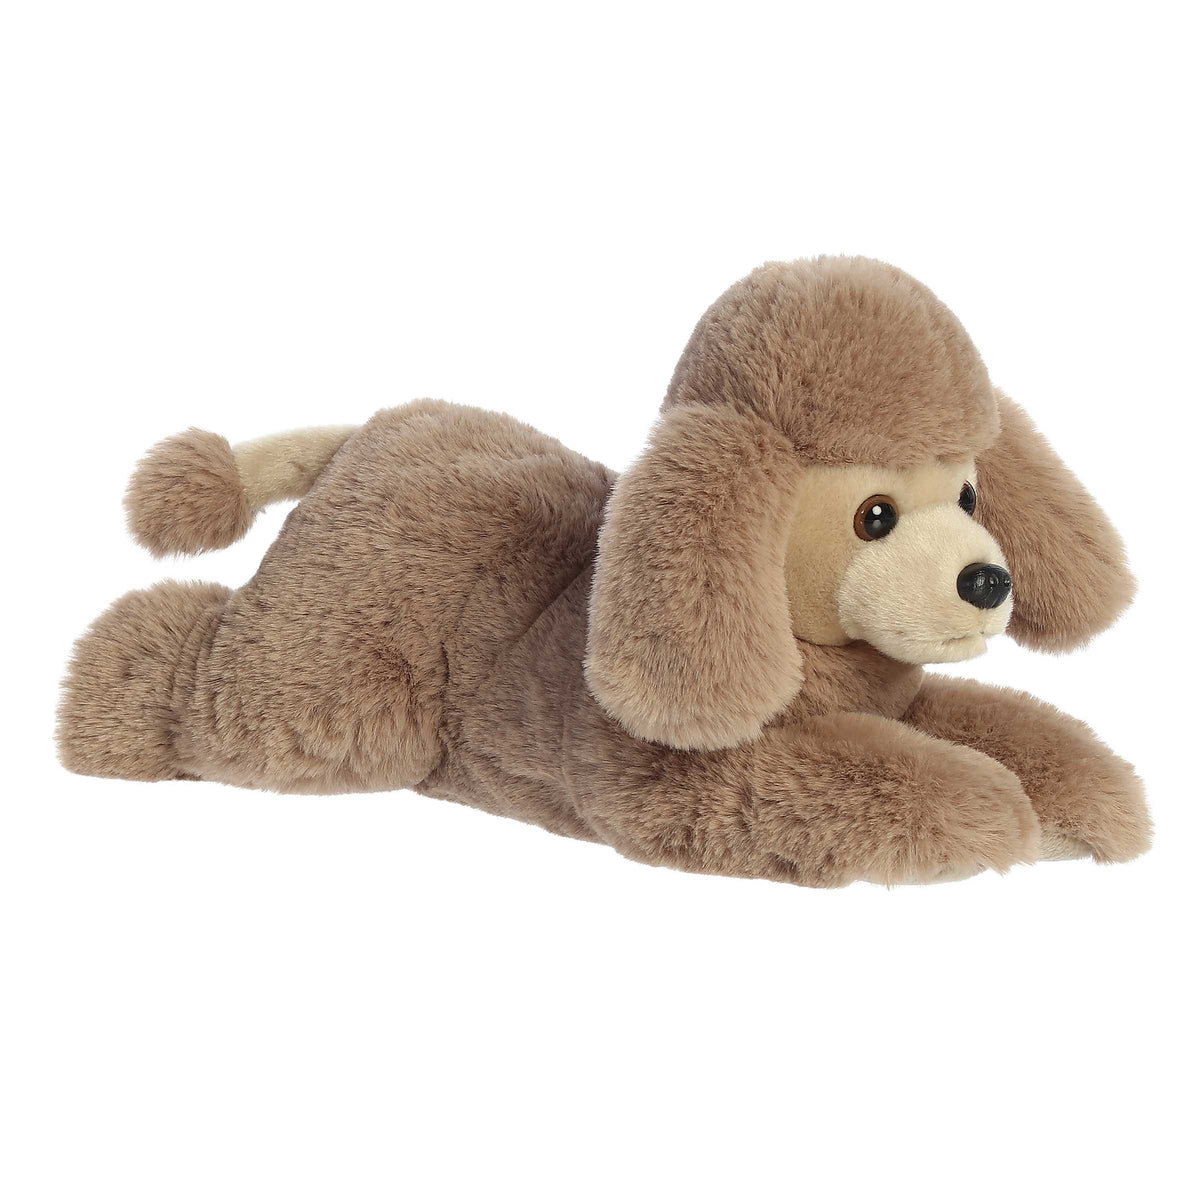 Graceful Flopsie Payton Poodle plush with plush coat and expressive face, offering elegance and warmth.